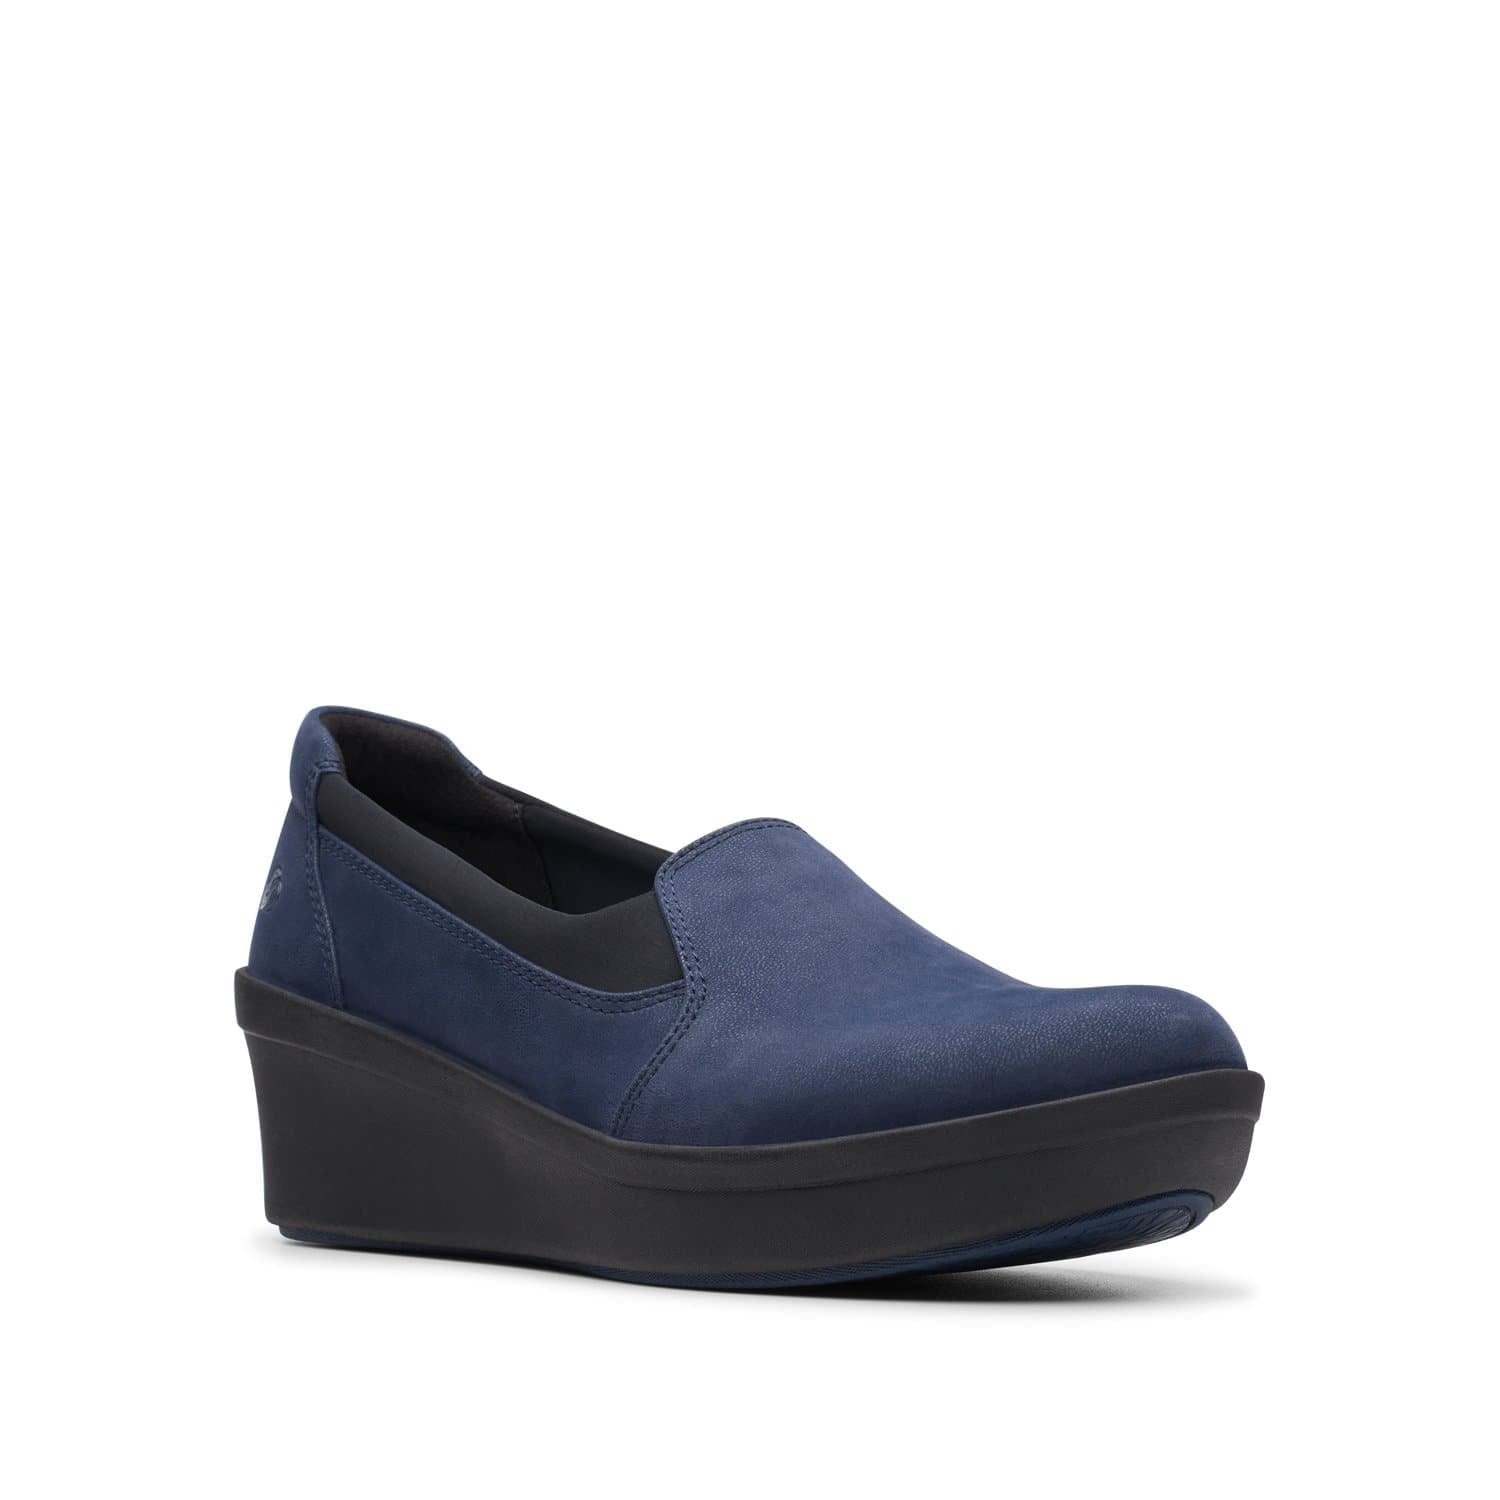 Clarks-Step-Rose-Moon-Women's-Shoes-Navy-26147035